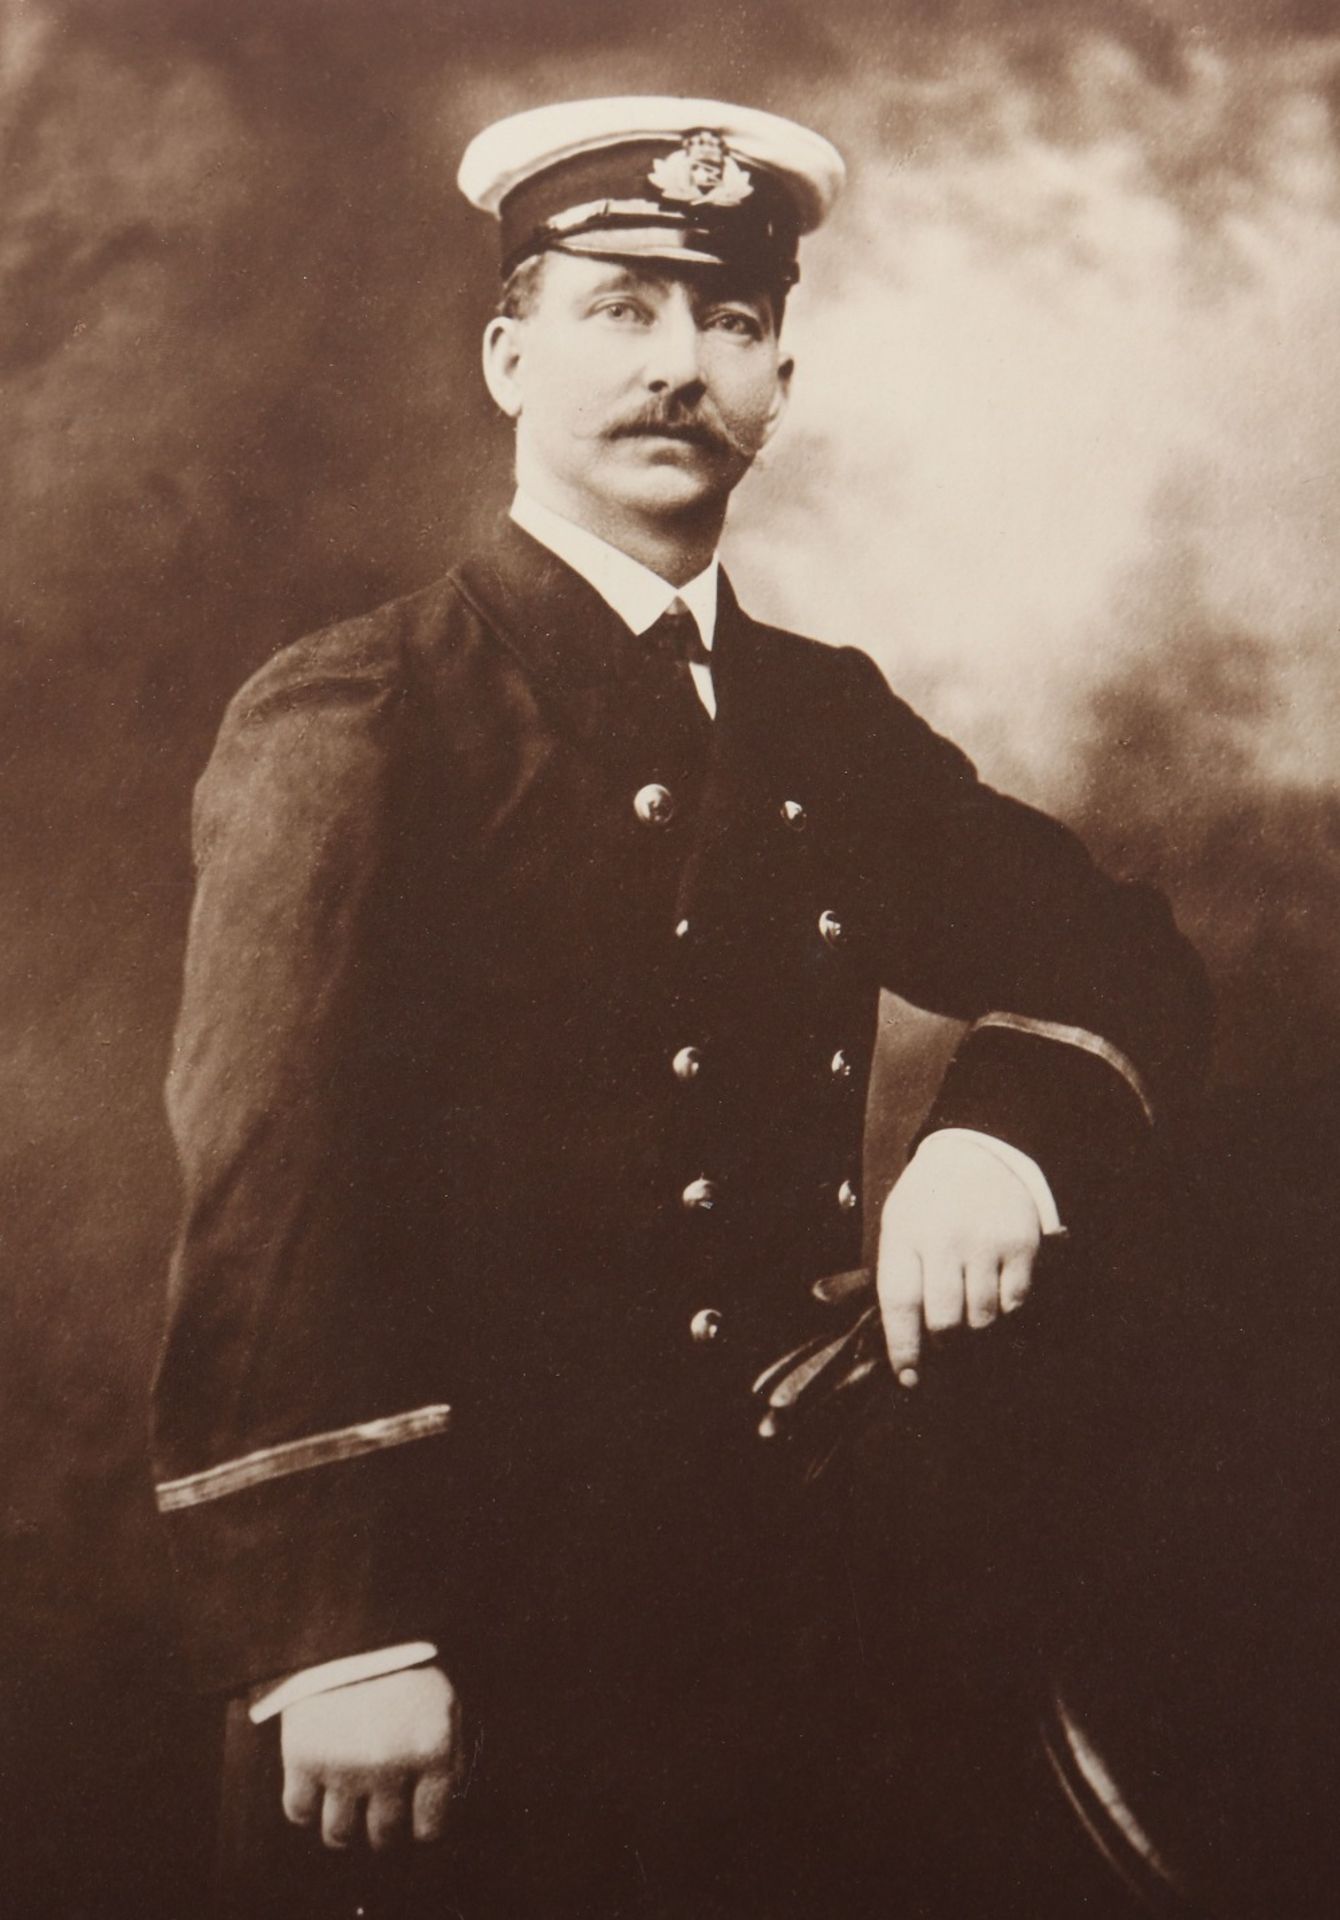 Photograph of White Star Line Officer